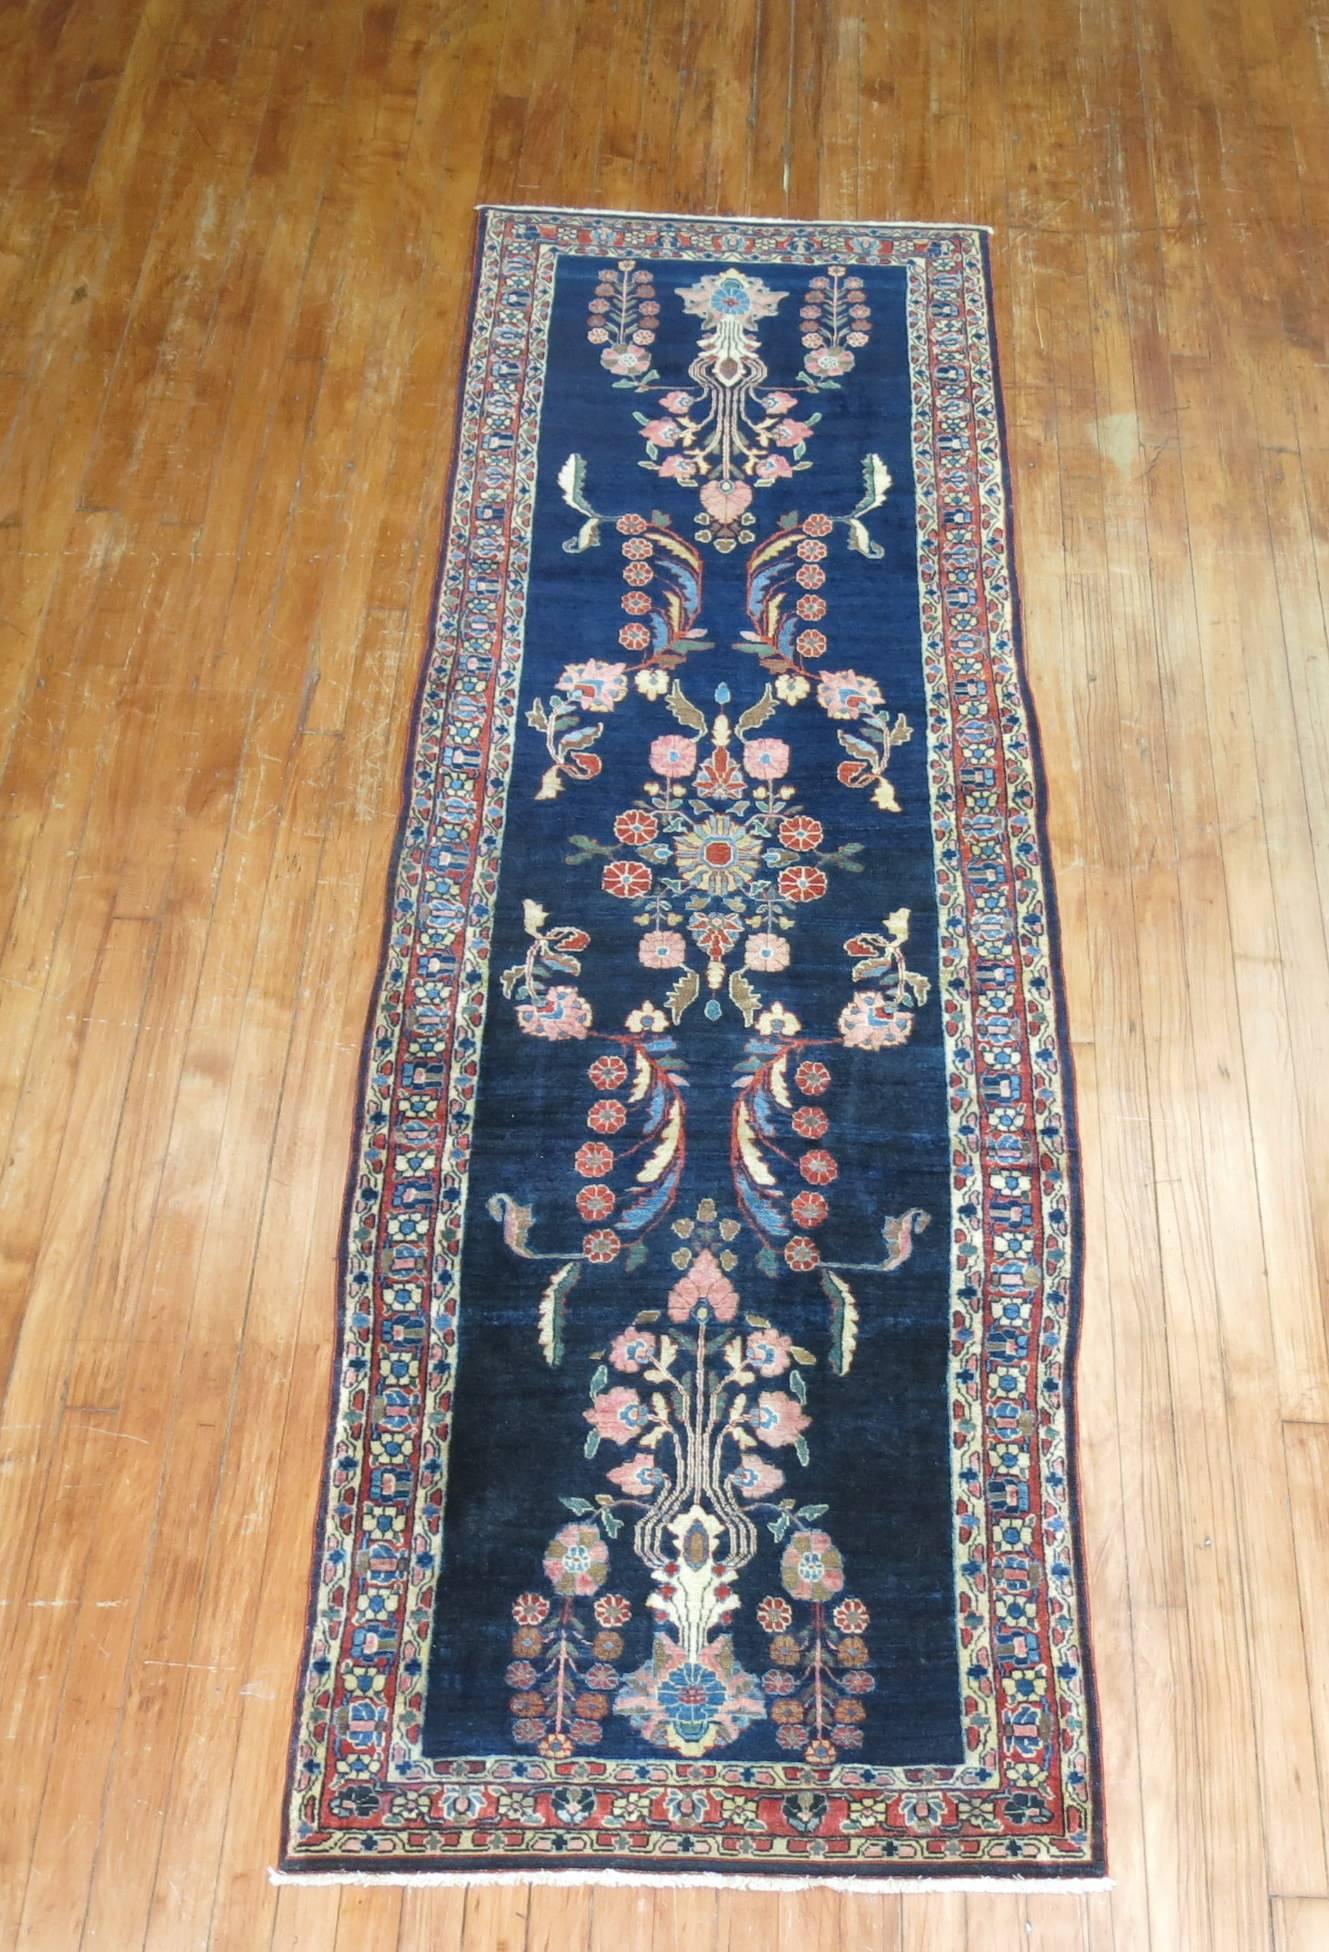 Super fine quality rare size early 20th century jewel toned Persian Sarouk runner.